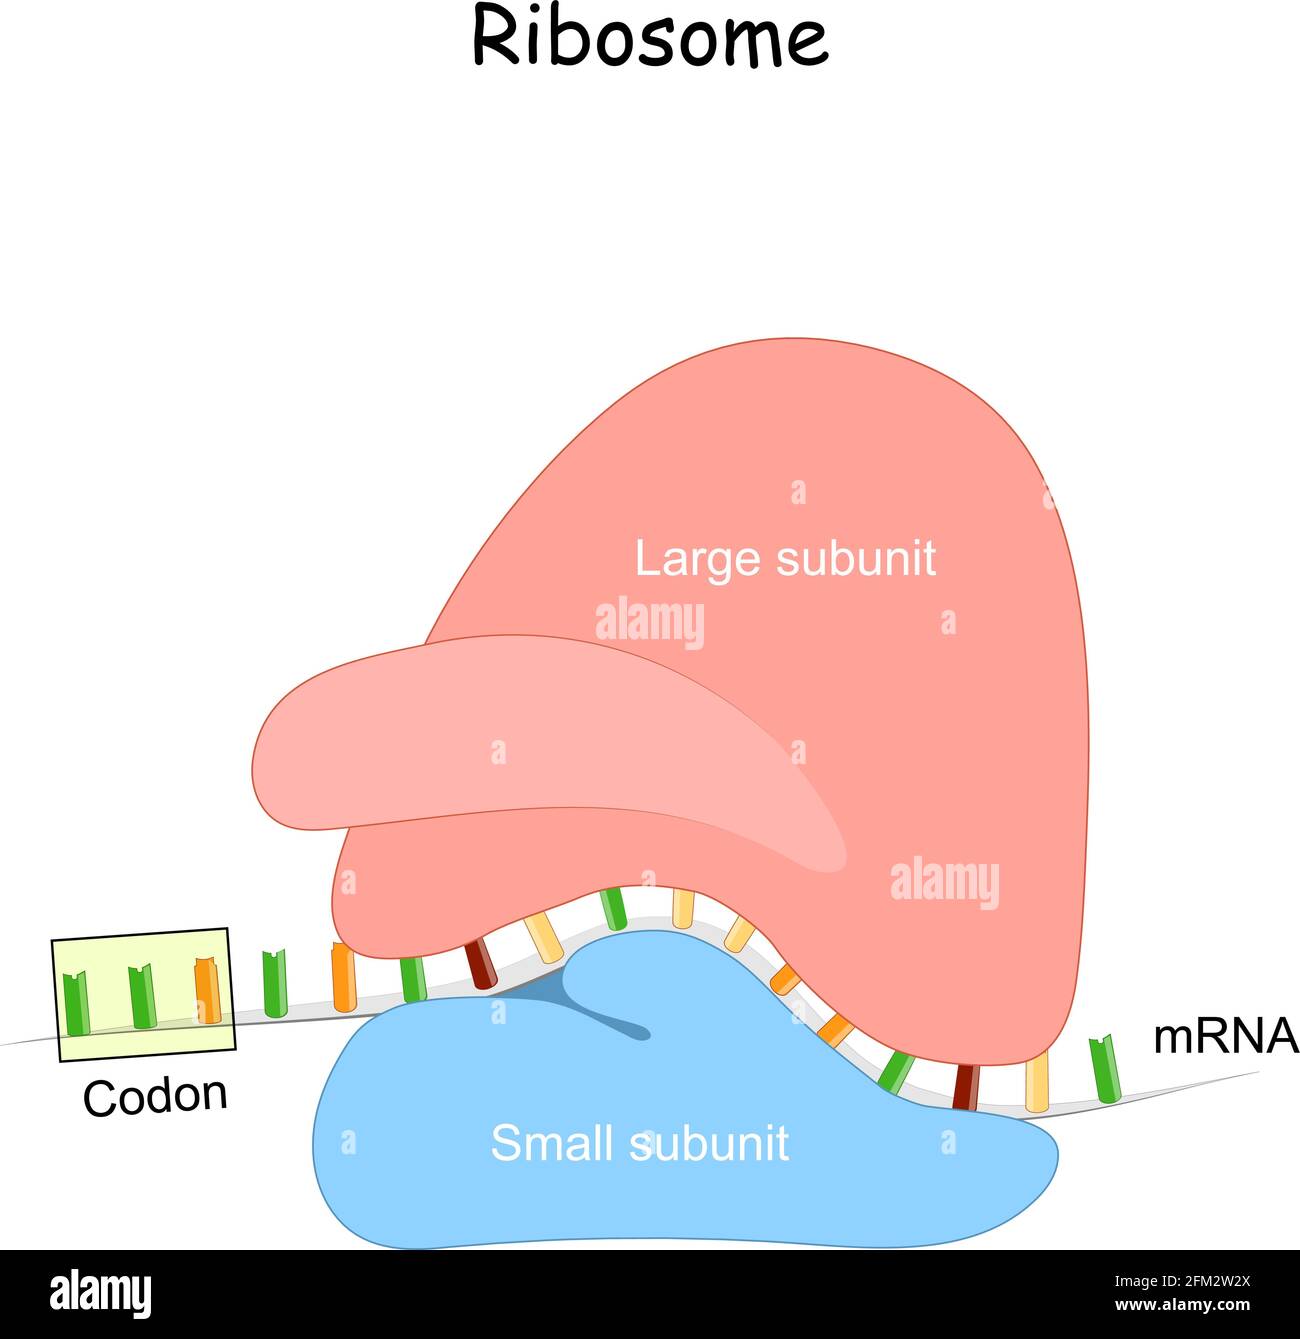 Ribosome and mRNA. Anatomy of macromolecular machines, that protein synthesis. mRNA translation. small and large subunit. mRNA vaccine Stock Vector